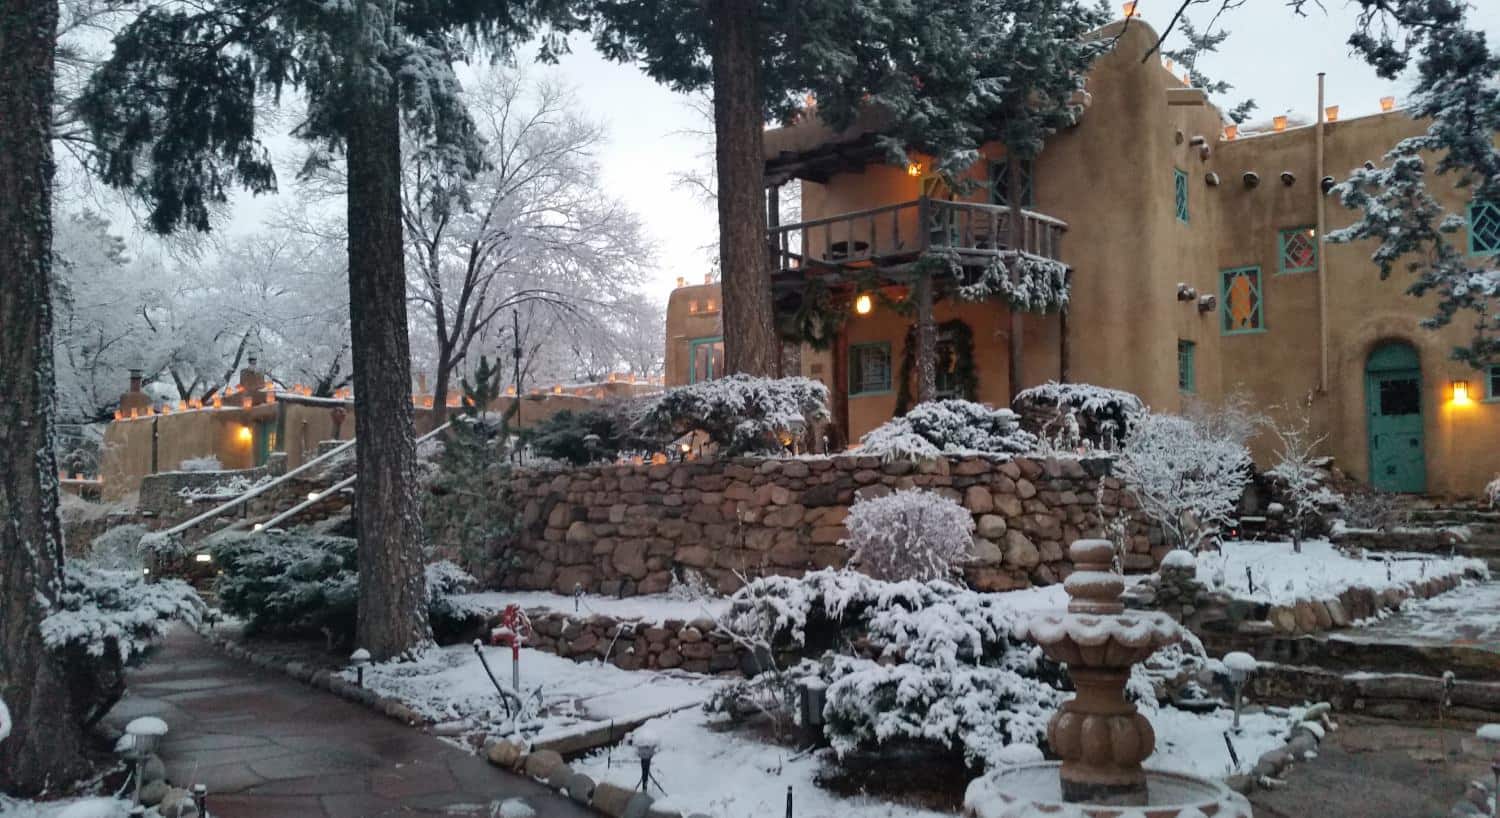 Exterior view of the property surrounded by large green trees with snow coming down, covering vegetation